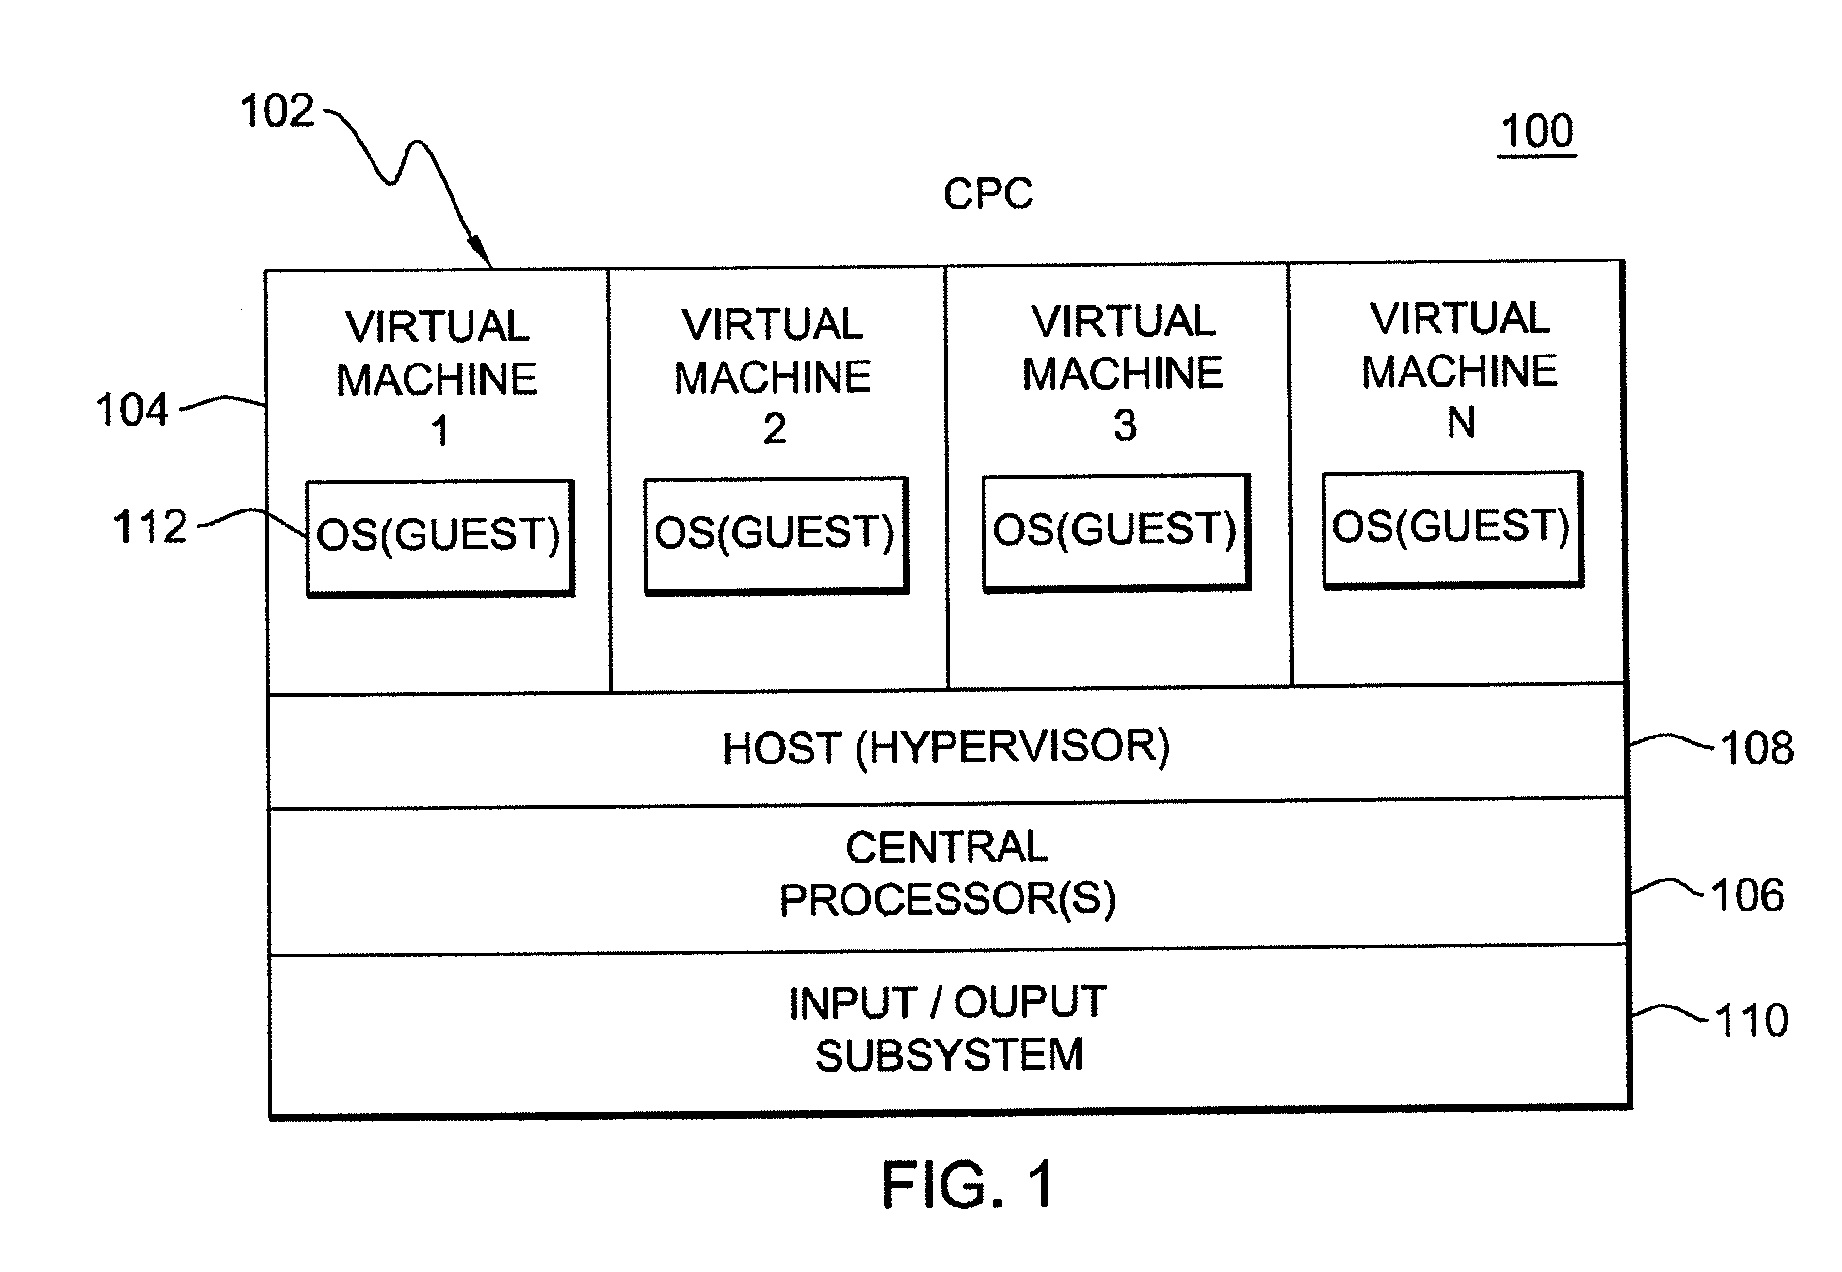 Managing use of storage by multiple pageable guests of a computing environment